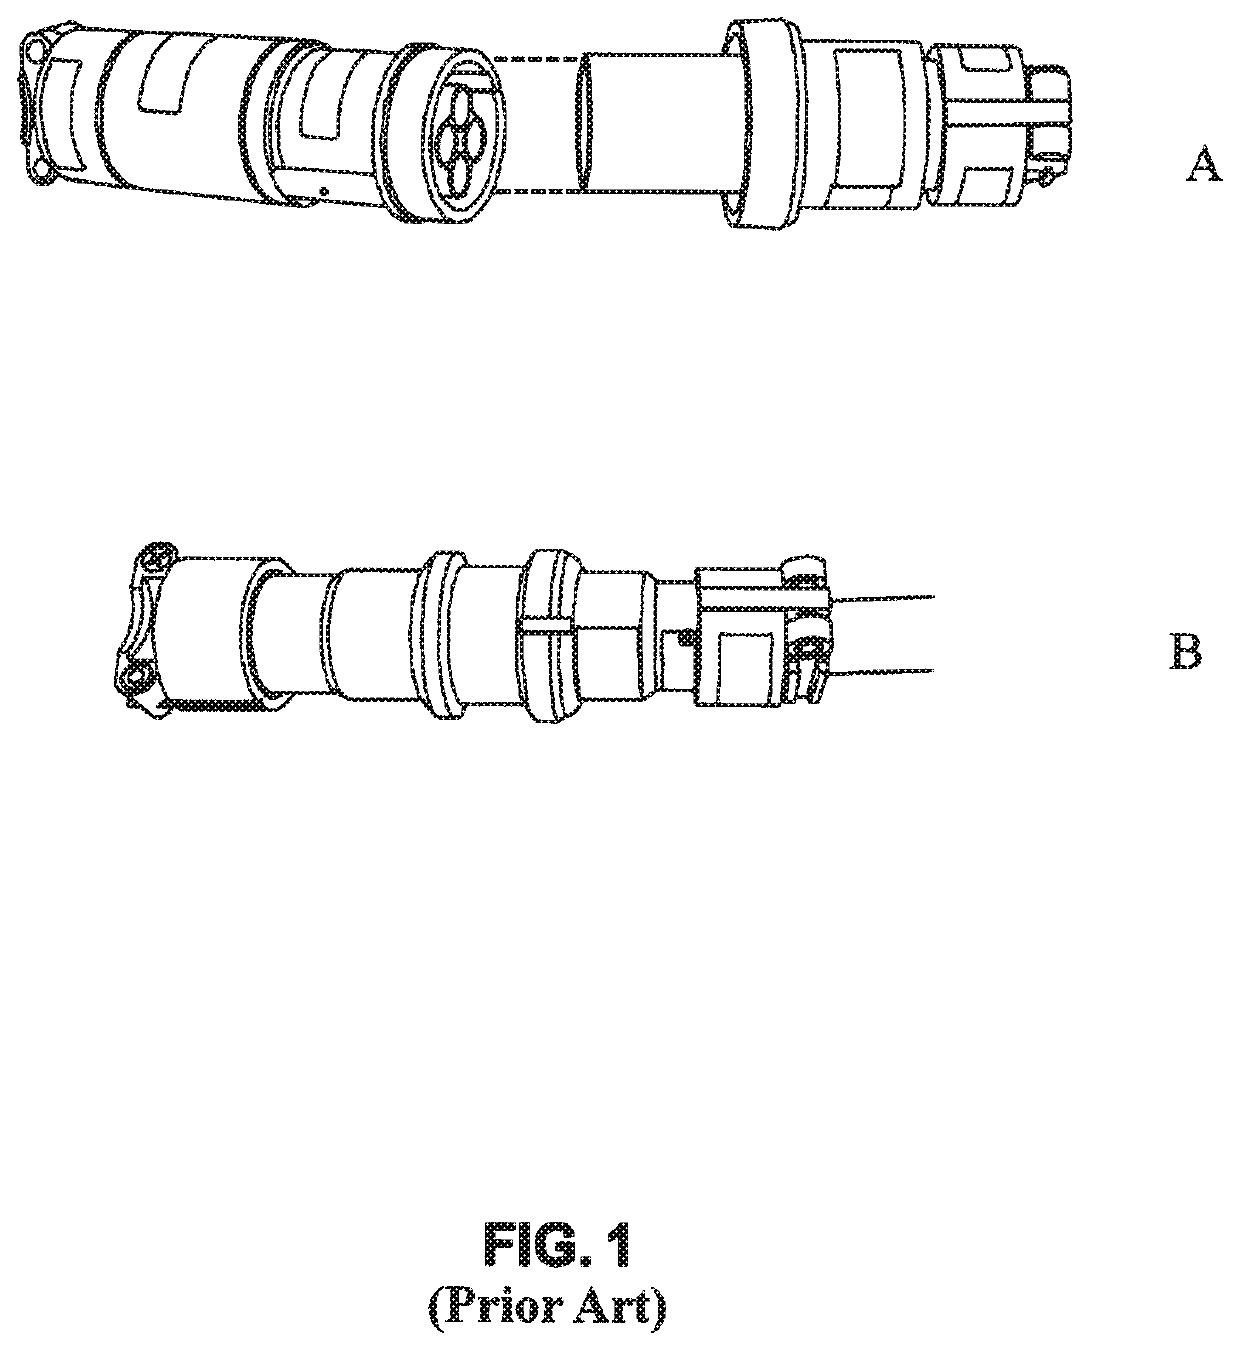 Electrical connector housings with cam-lock couplings